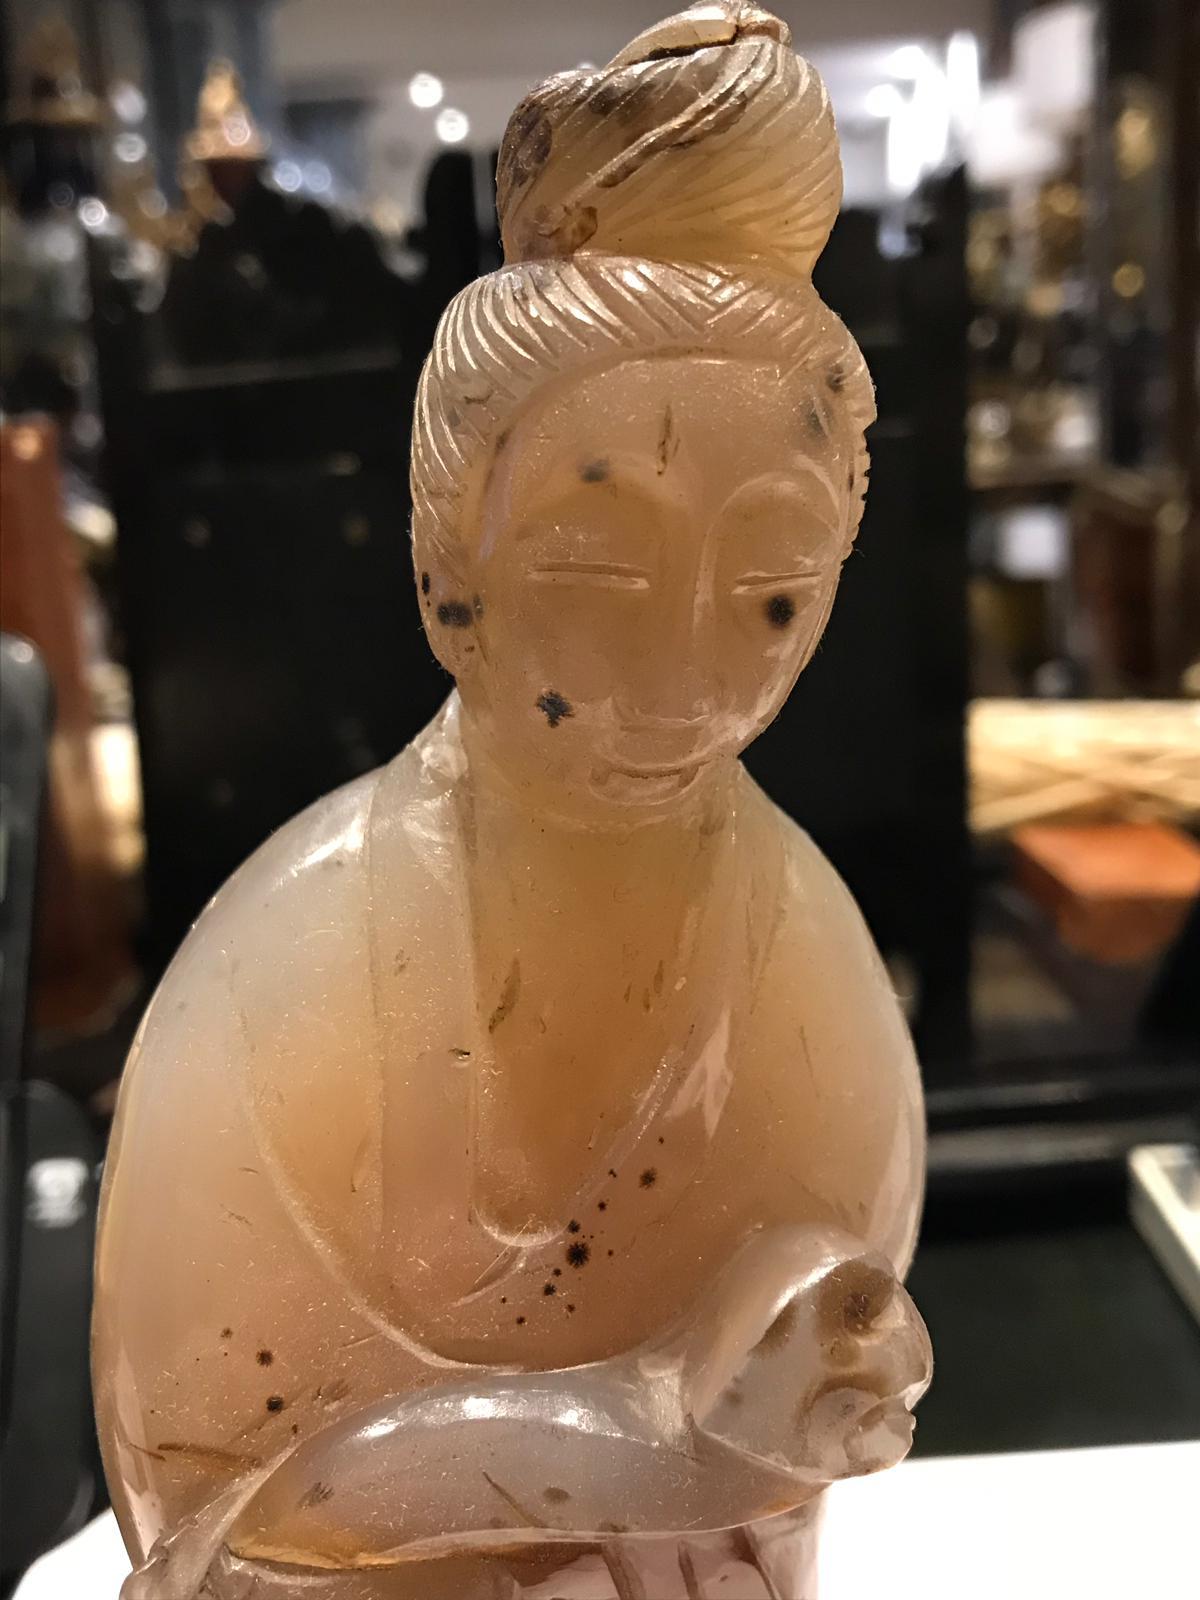 A smoky agate carved figure of an Asian Woman. One of her hands is cusping something that lies across her figure. She has long robes in traditional dress and wears a bun. The stone is mostly smooth with some dents and scratches, but nothing drastic.